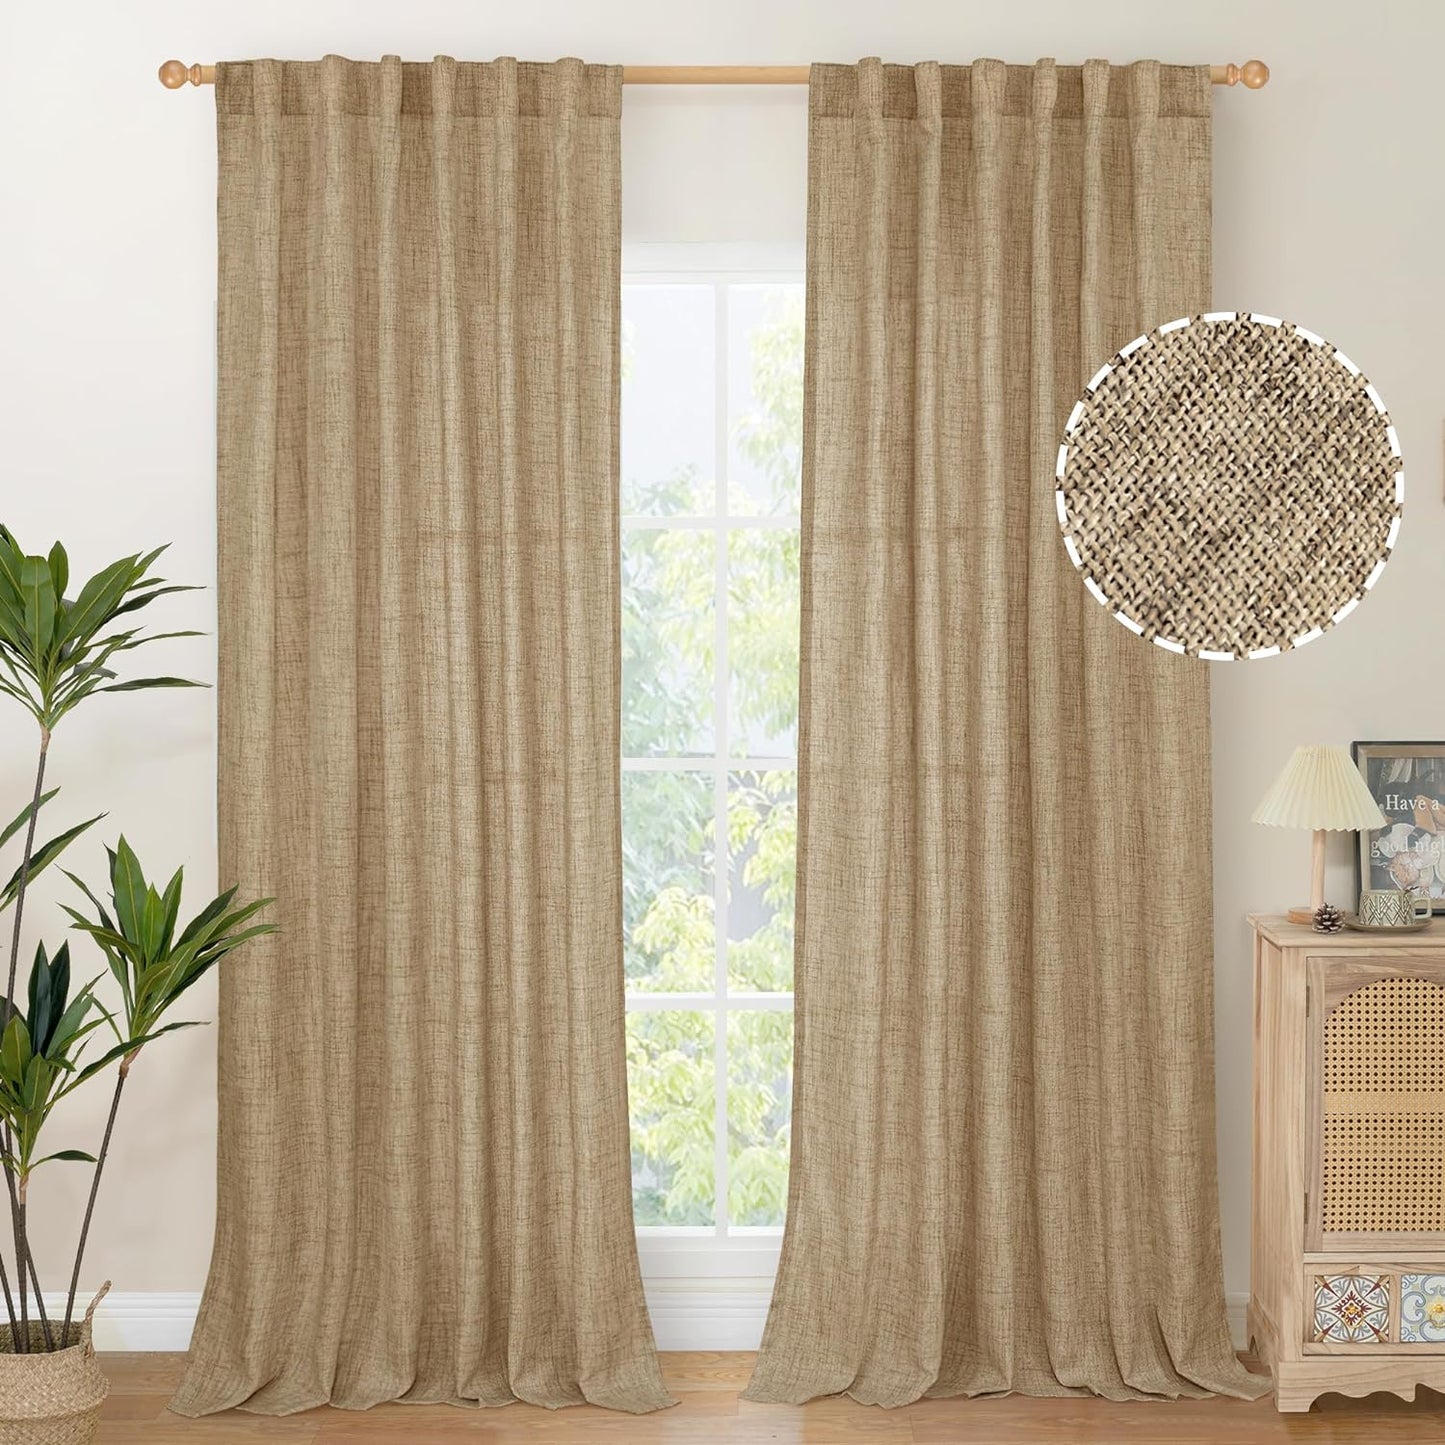 Youngstex Natural Linen Curtains 72 Inch Length 2 Panels for Living Room Light Filtering Textured Window Drapes for Bedroom Dining Office Back Tab Rod Pocket, 52 X 72 Inch  YoungsTex Toffee 52W X 95L 